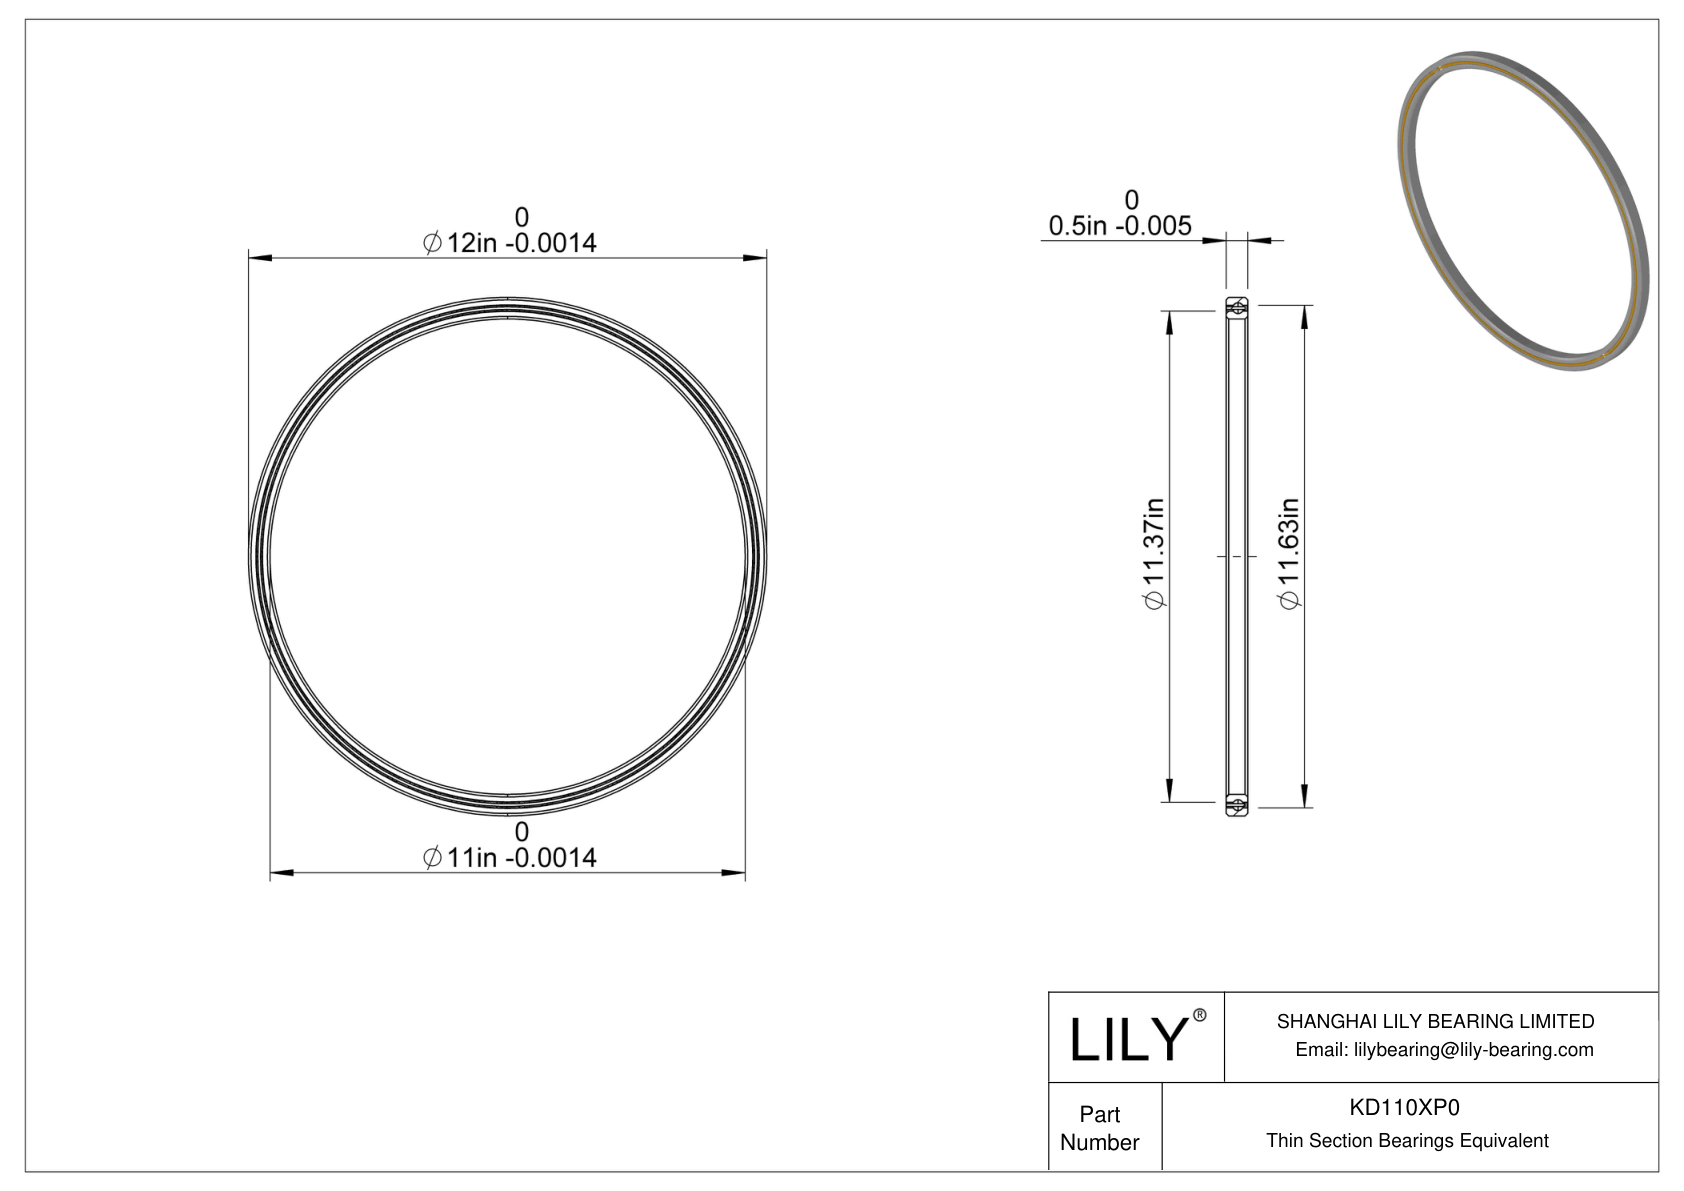 KD110XP0 Constant Section (CS) Bearings cad drawing